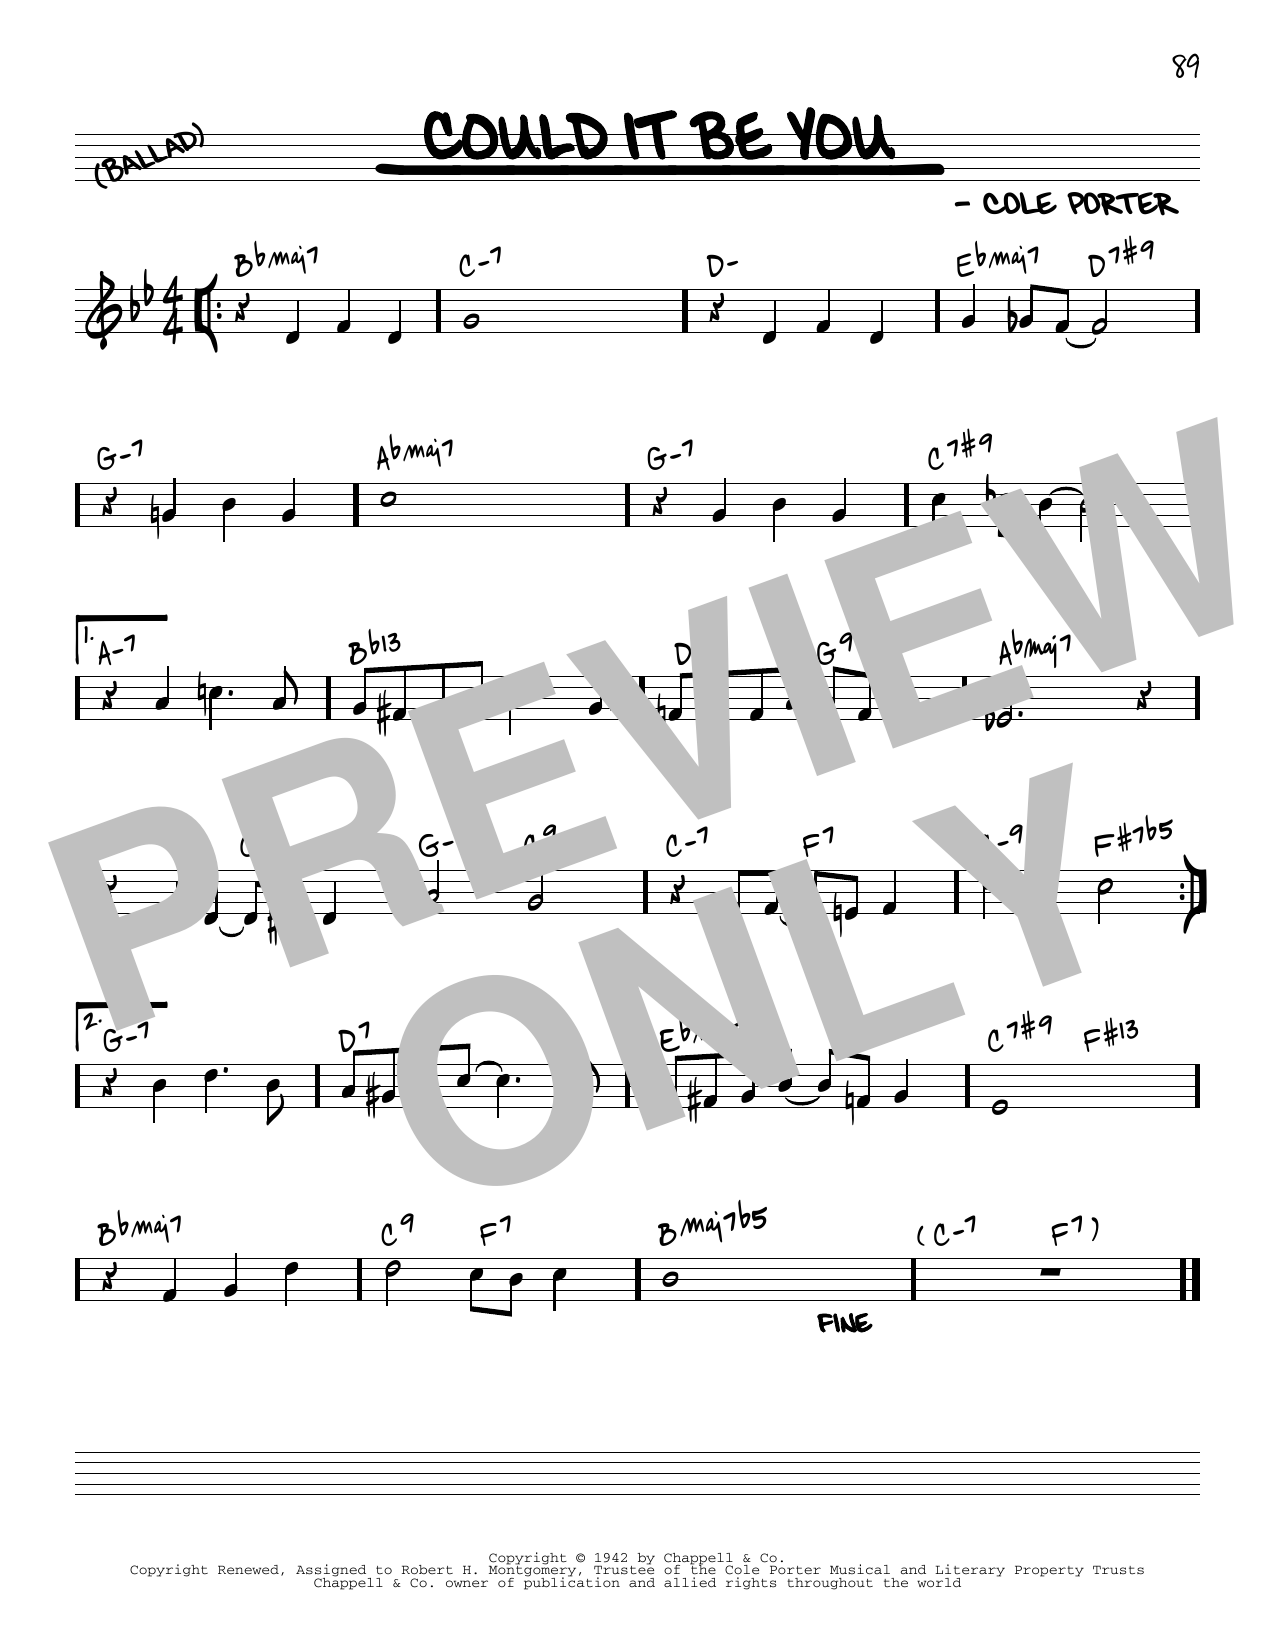 Download Cole Porter Could It Be You [Reharmonized version] Sheet Music